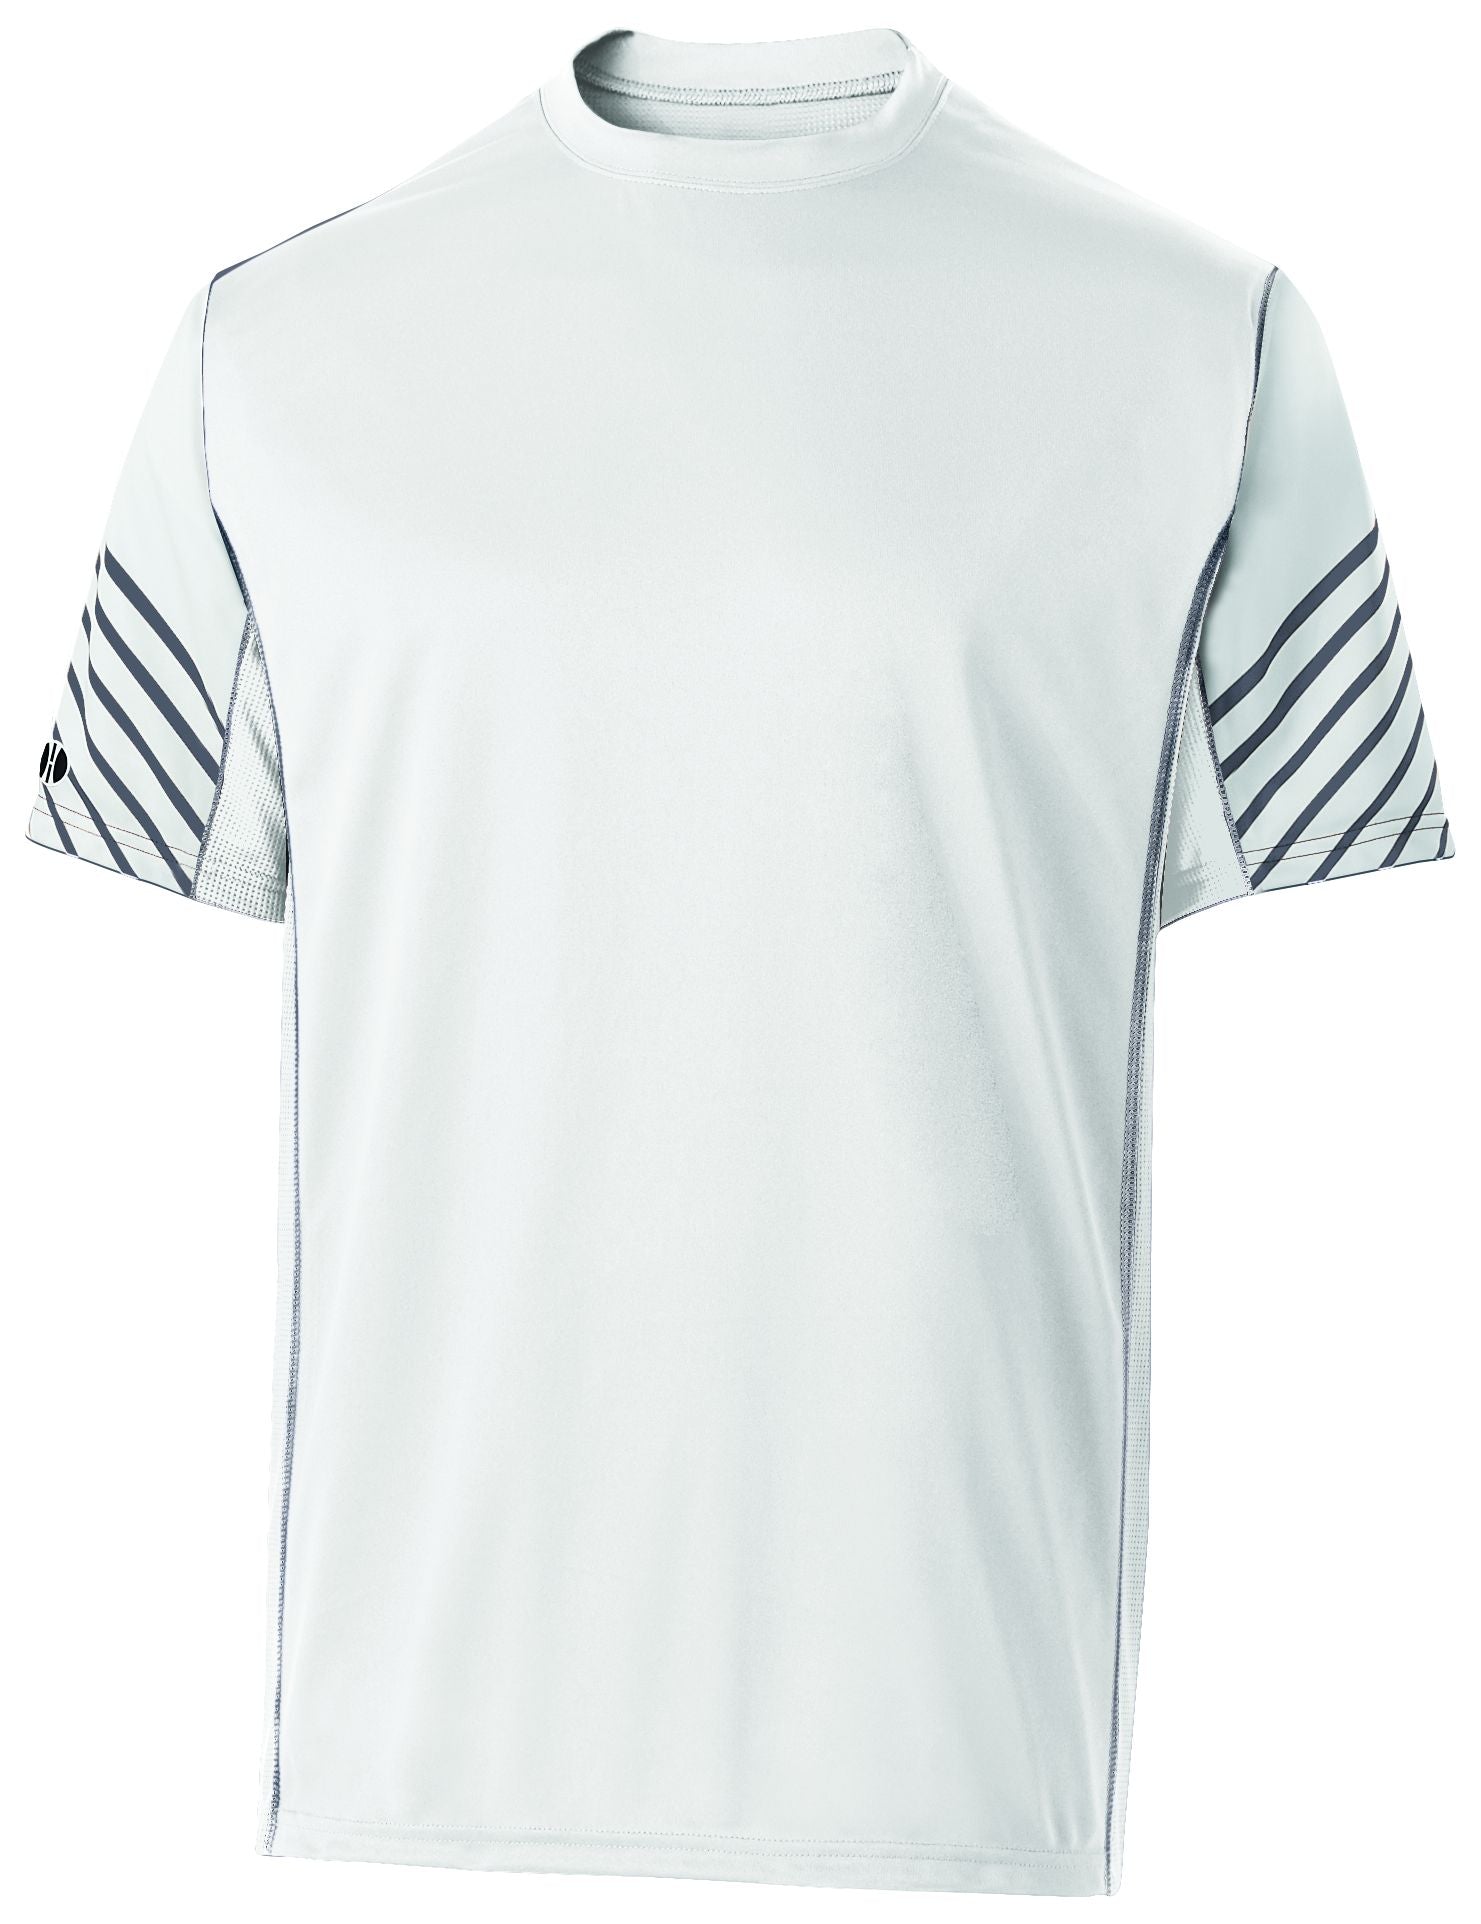 Holloway Arc Short Sleeve Tee in White/Carbon  -Part of the Adult, Adult-Tee-Shirt, T-Shirts, Holloway, Shirts product lines at KanaleyCreations.com